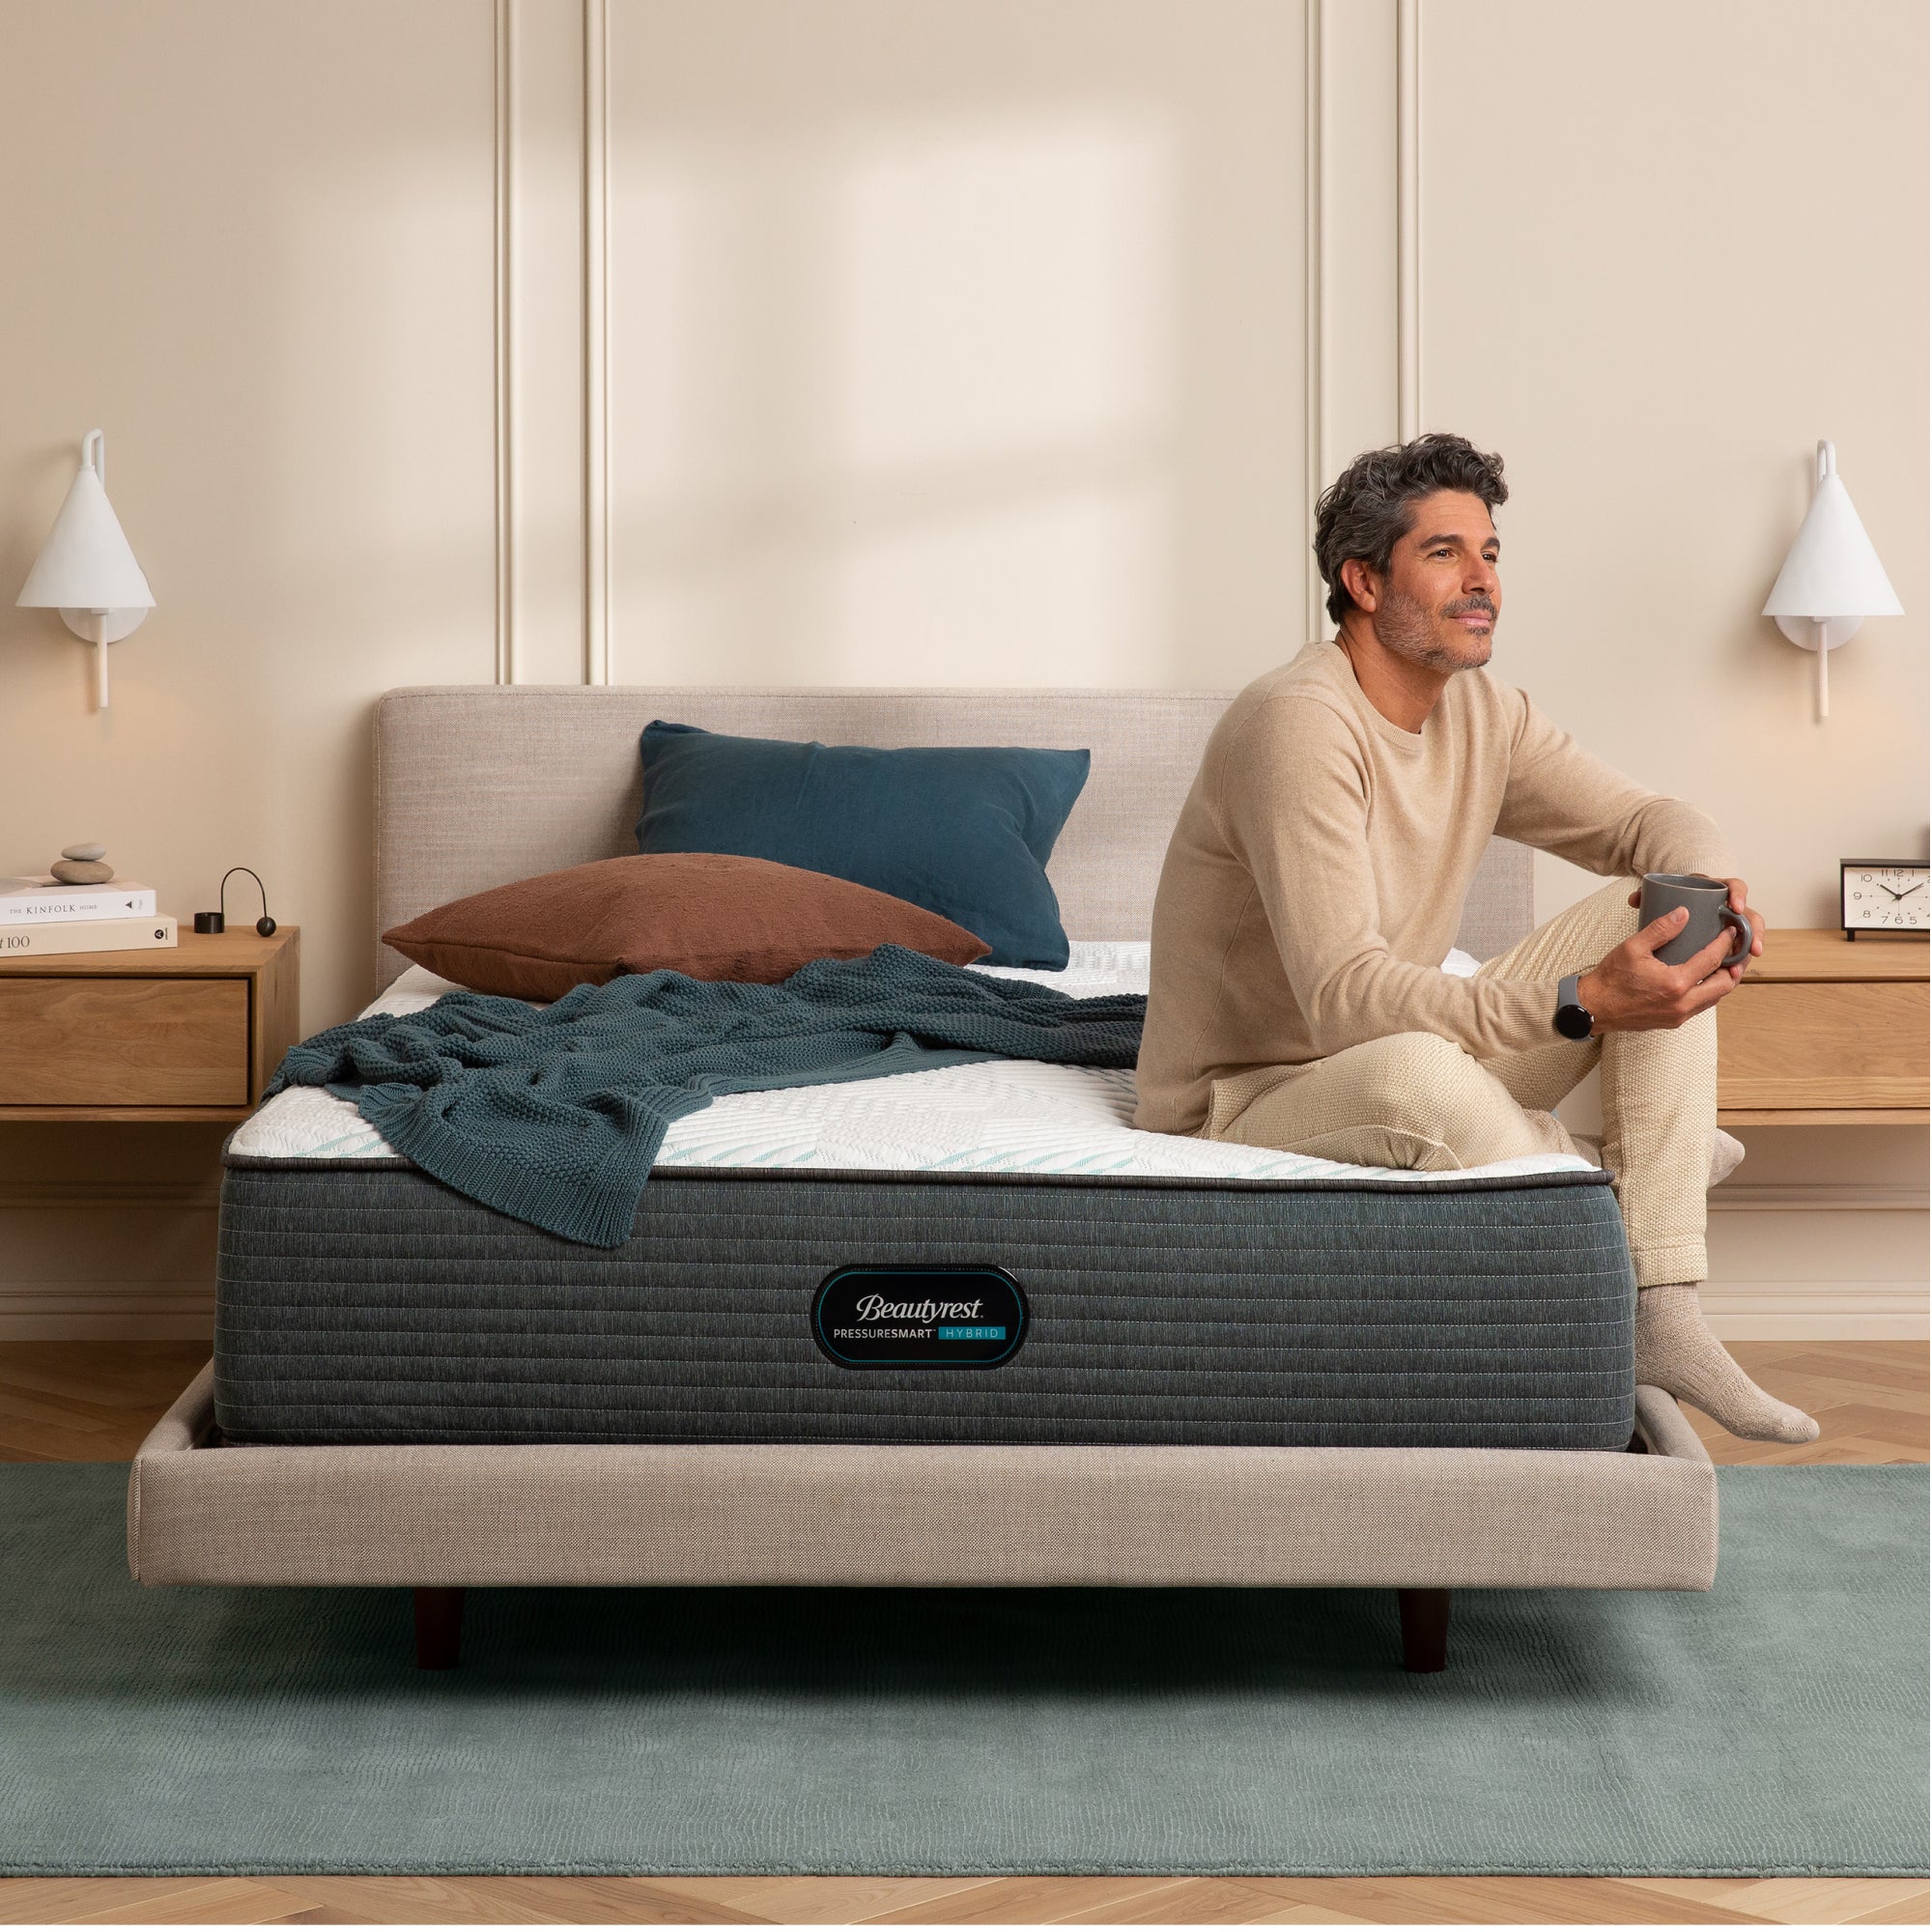 Man drinking coffee while sitting on the Beautyrest PressureSmart mattress||feel: firm||series: hybrid